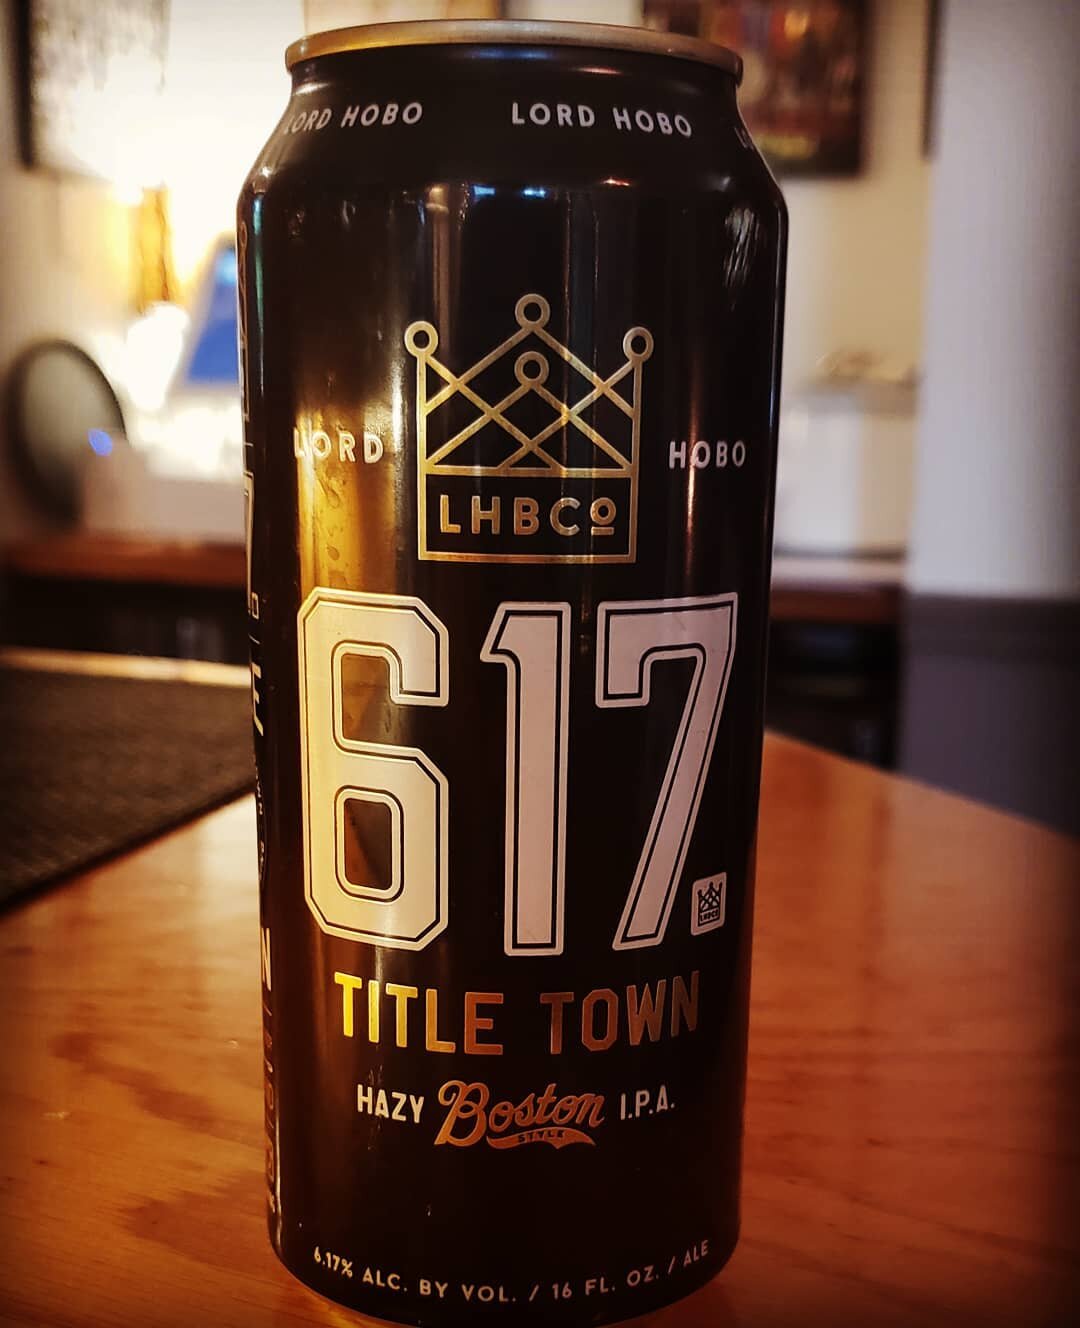 So, this just came in. Come and drink it. I promise it'll leave a better taste in your mouth than last night's game. #stompinggroundsgrille #617 #titletown #lordhobo #gobruins #bummedout #cityofchampions